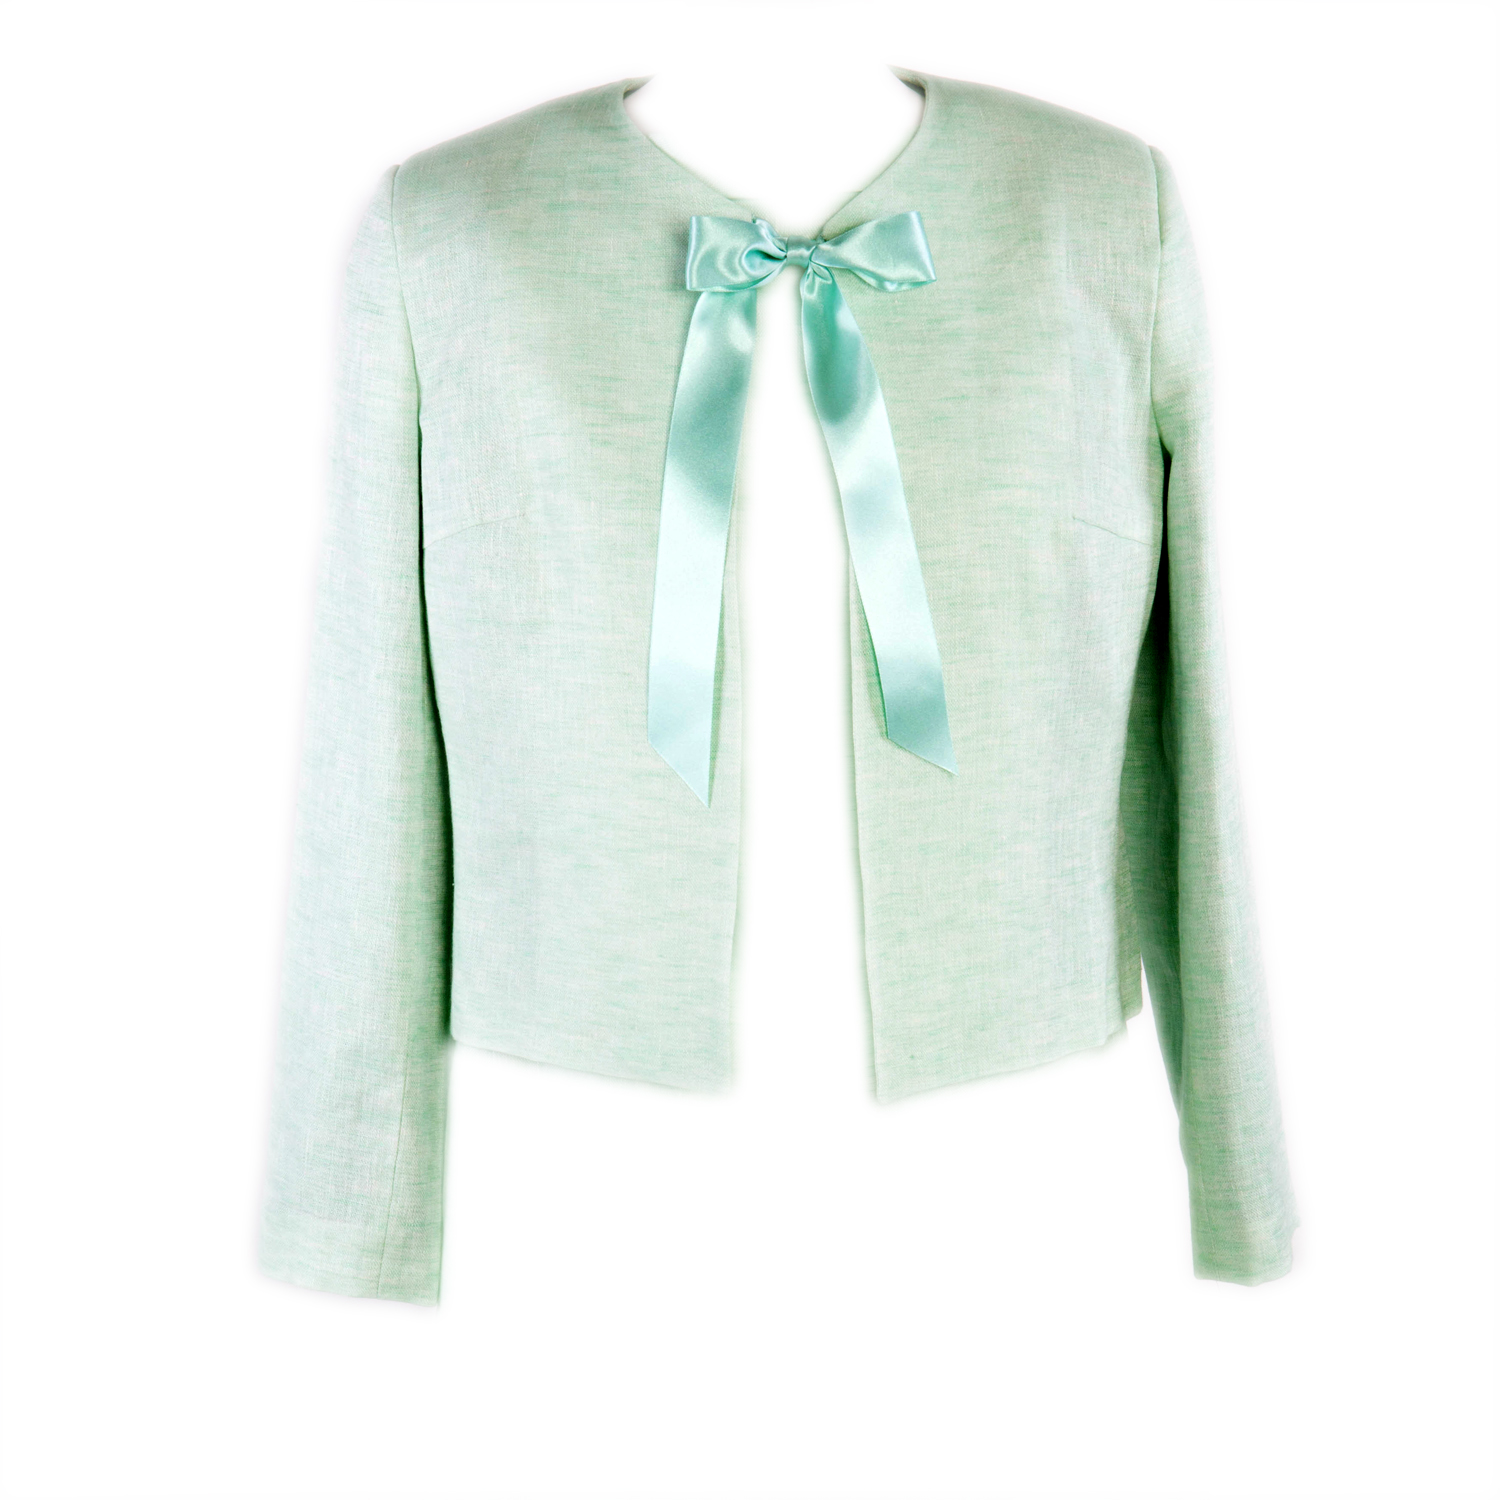 A green linen short jacket with ribbon front - The Little Wedding Company